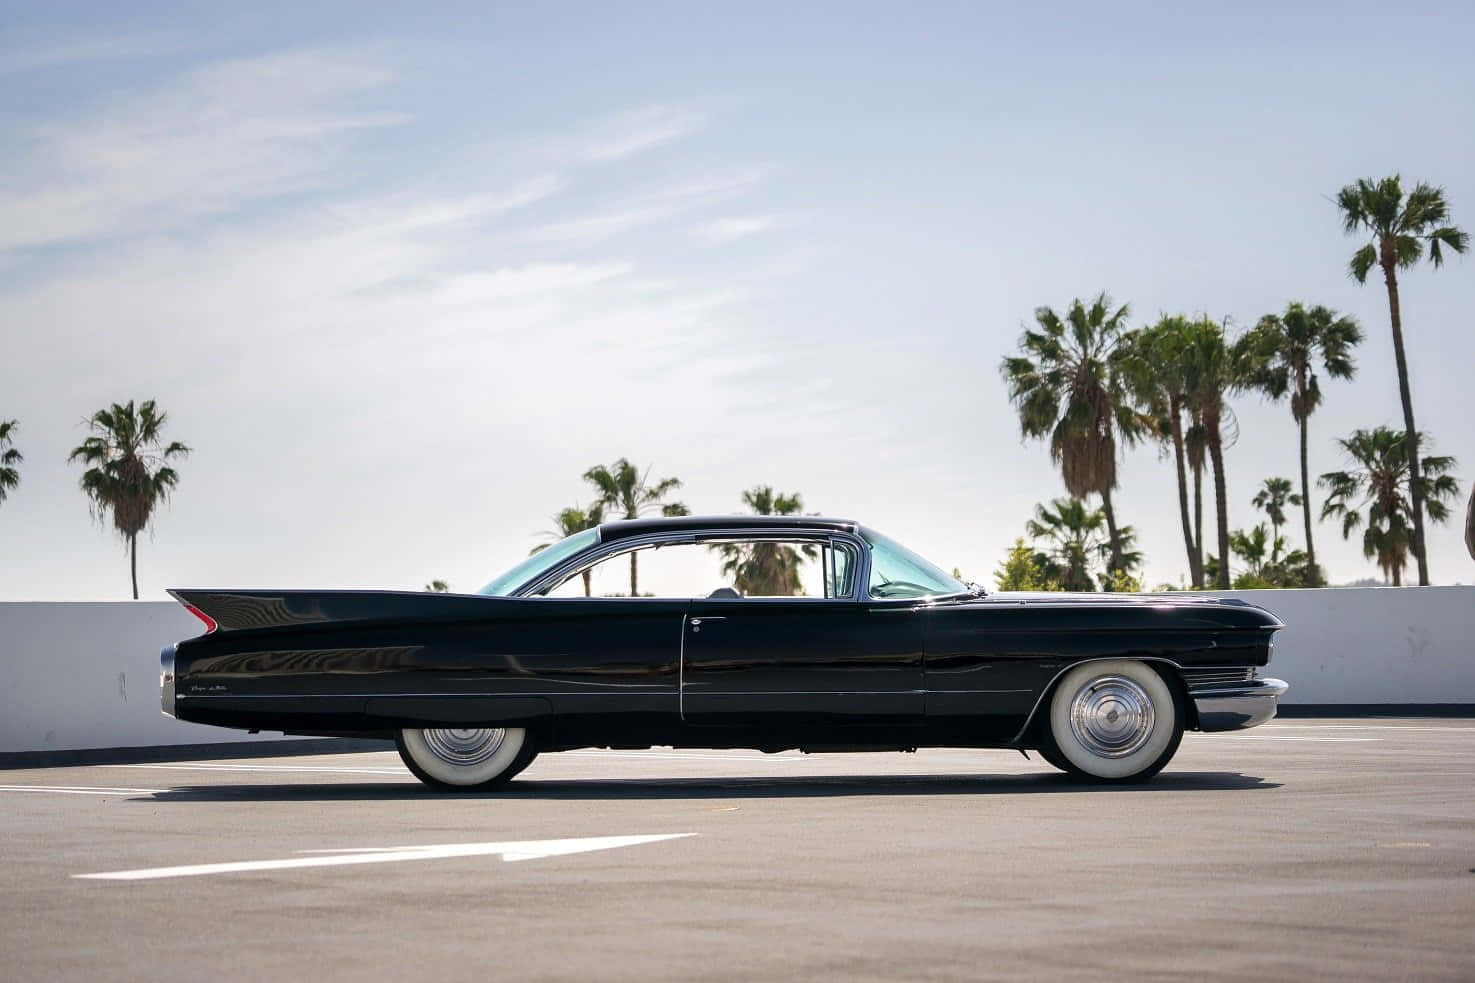 Ultimate Elegance - The Cadillac Deville Wallpaper